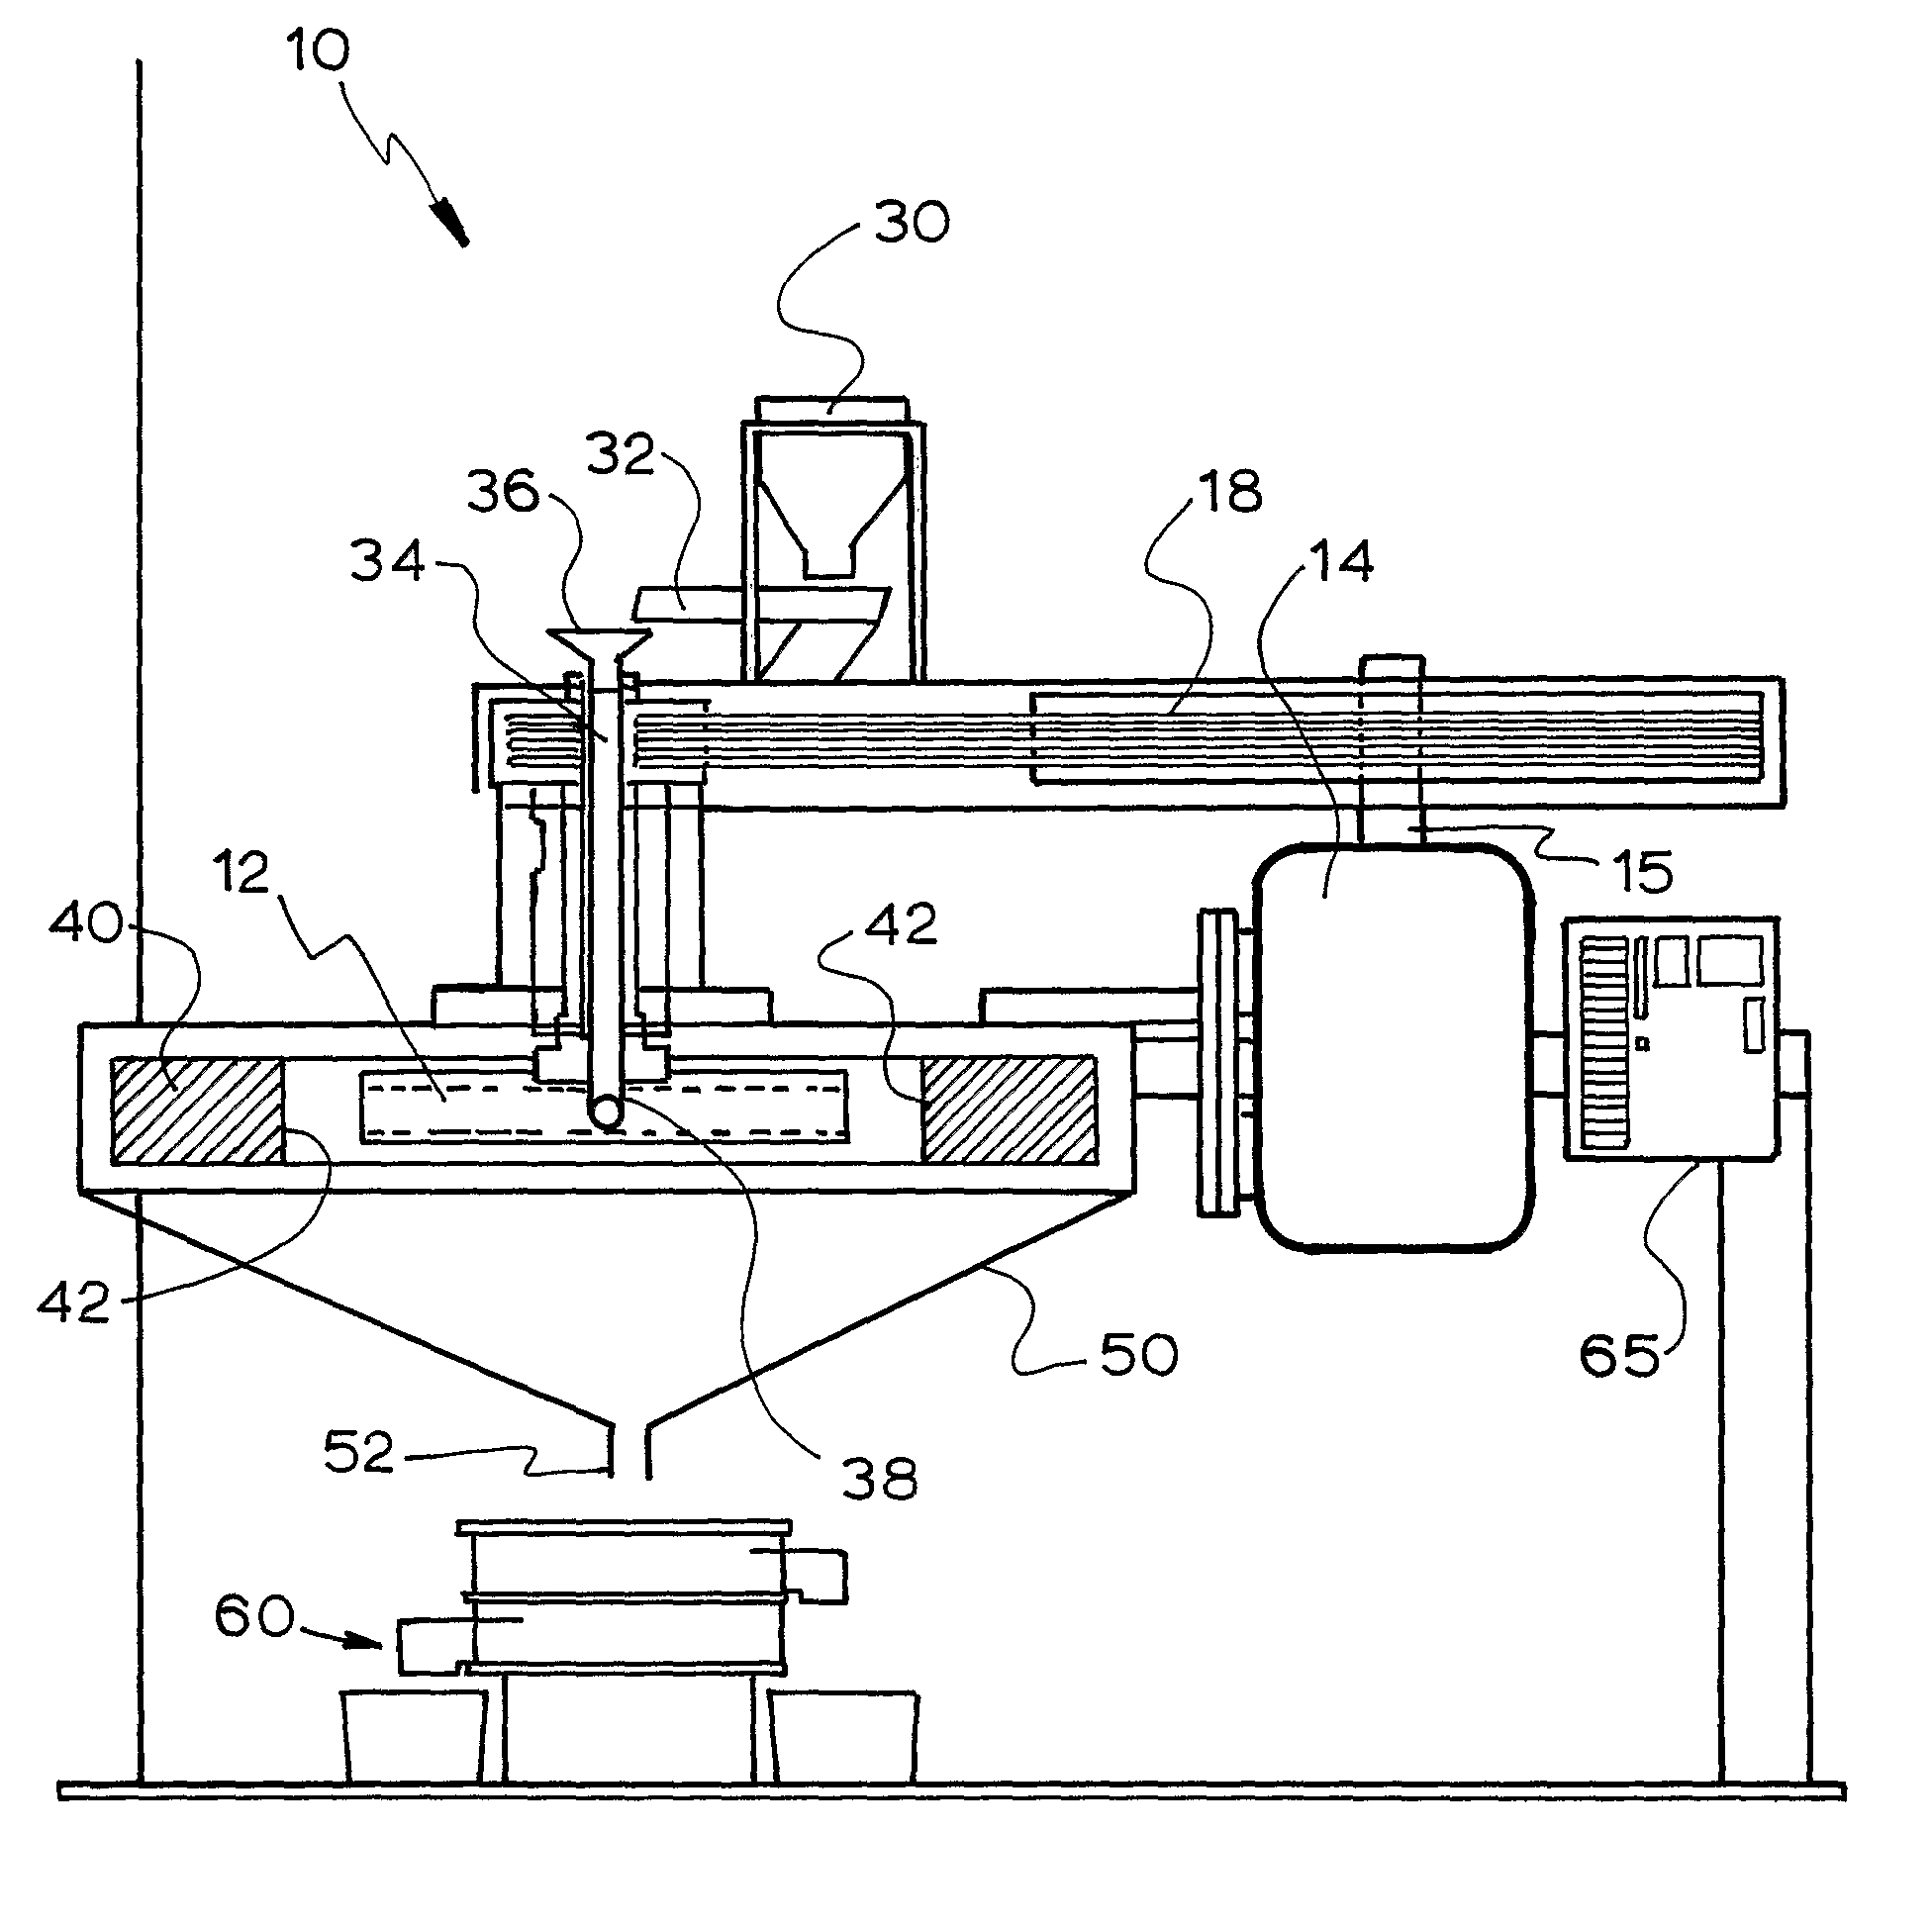 Apparatus for determining breakage properties of particulate material